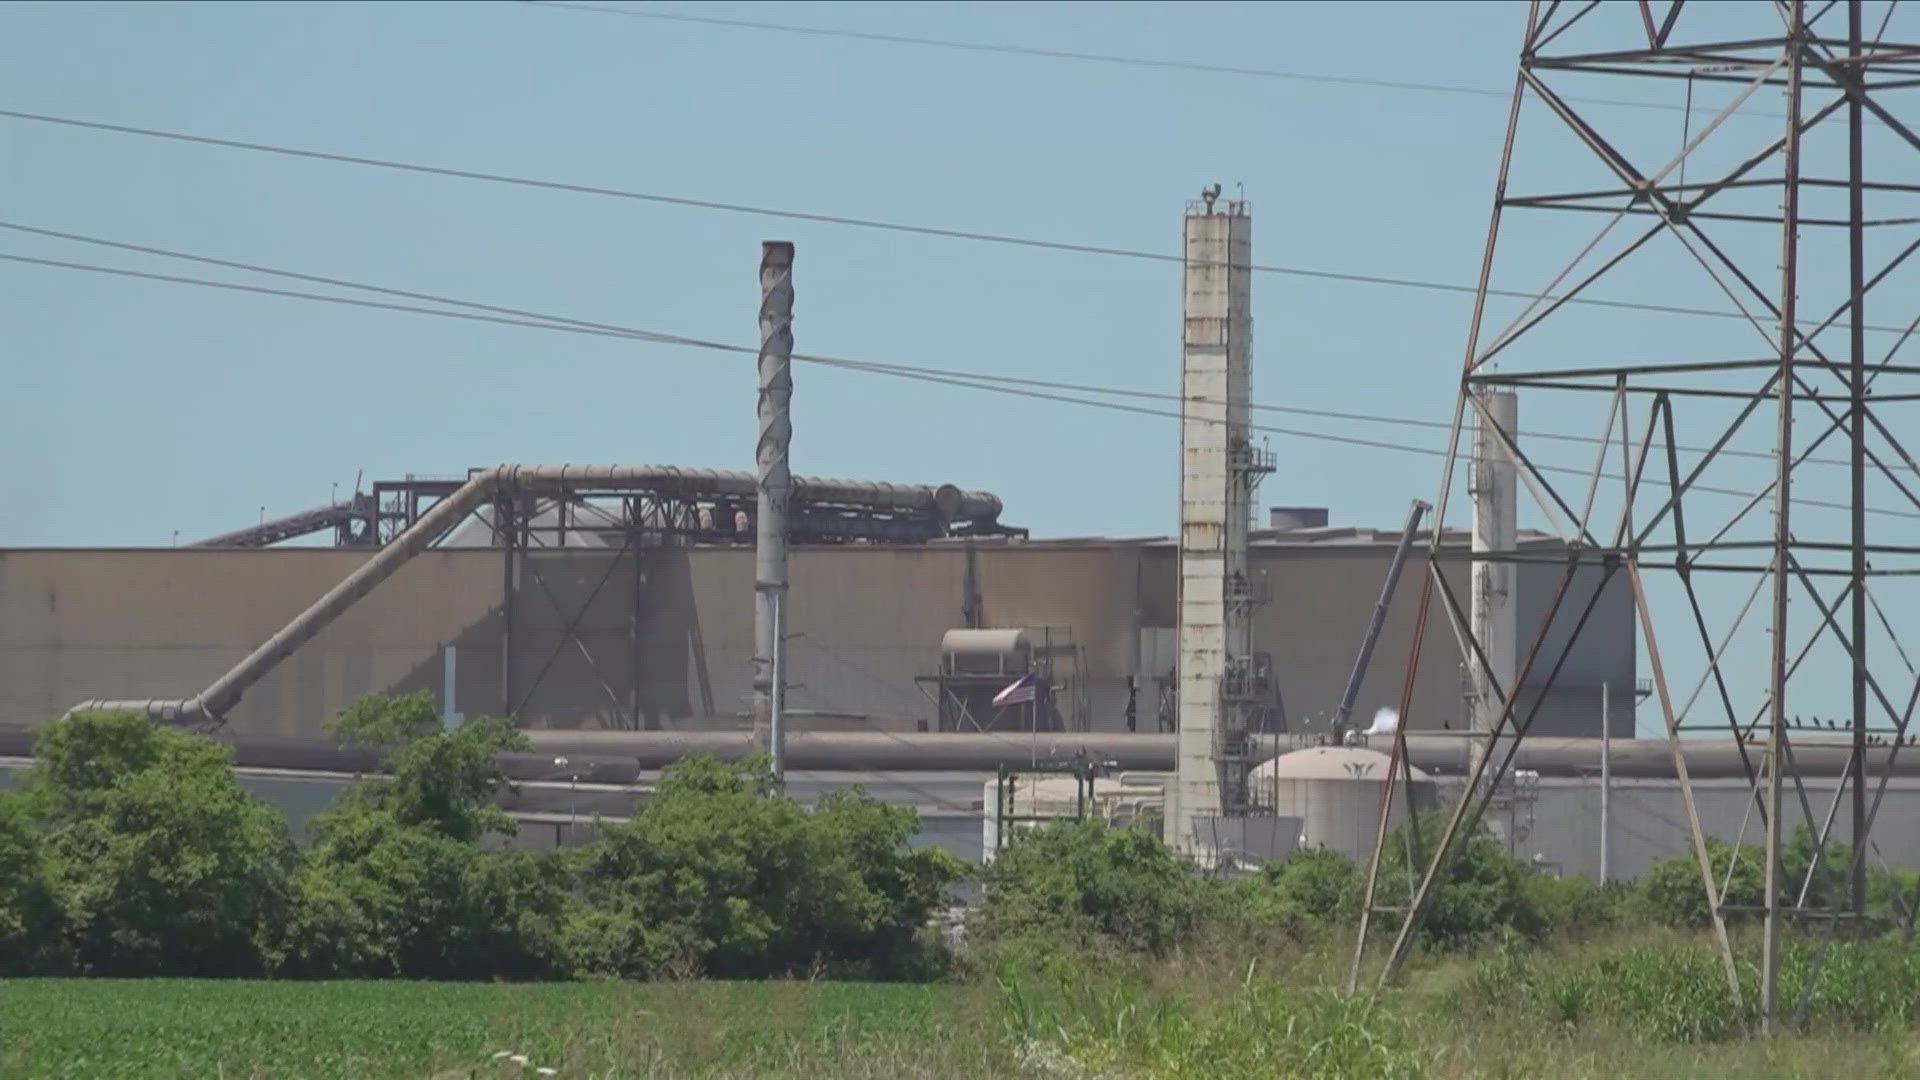 Memphis Community Against Pollution is demanding city leaders respond to their requests about the tech company's facility being built in Southwest Memphis.